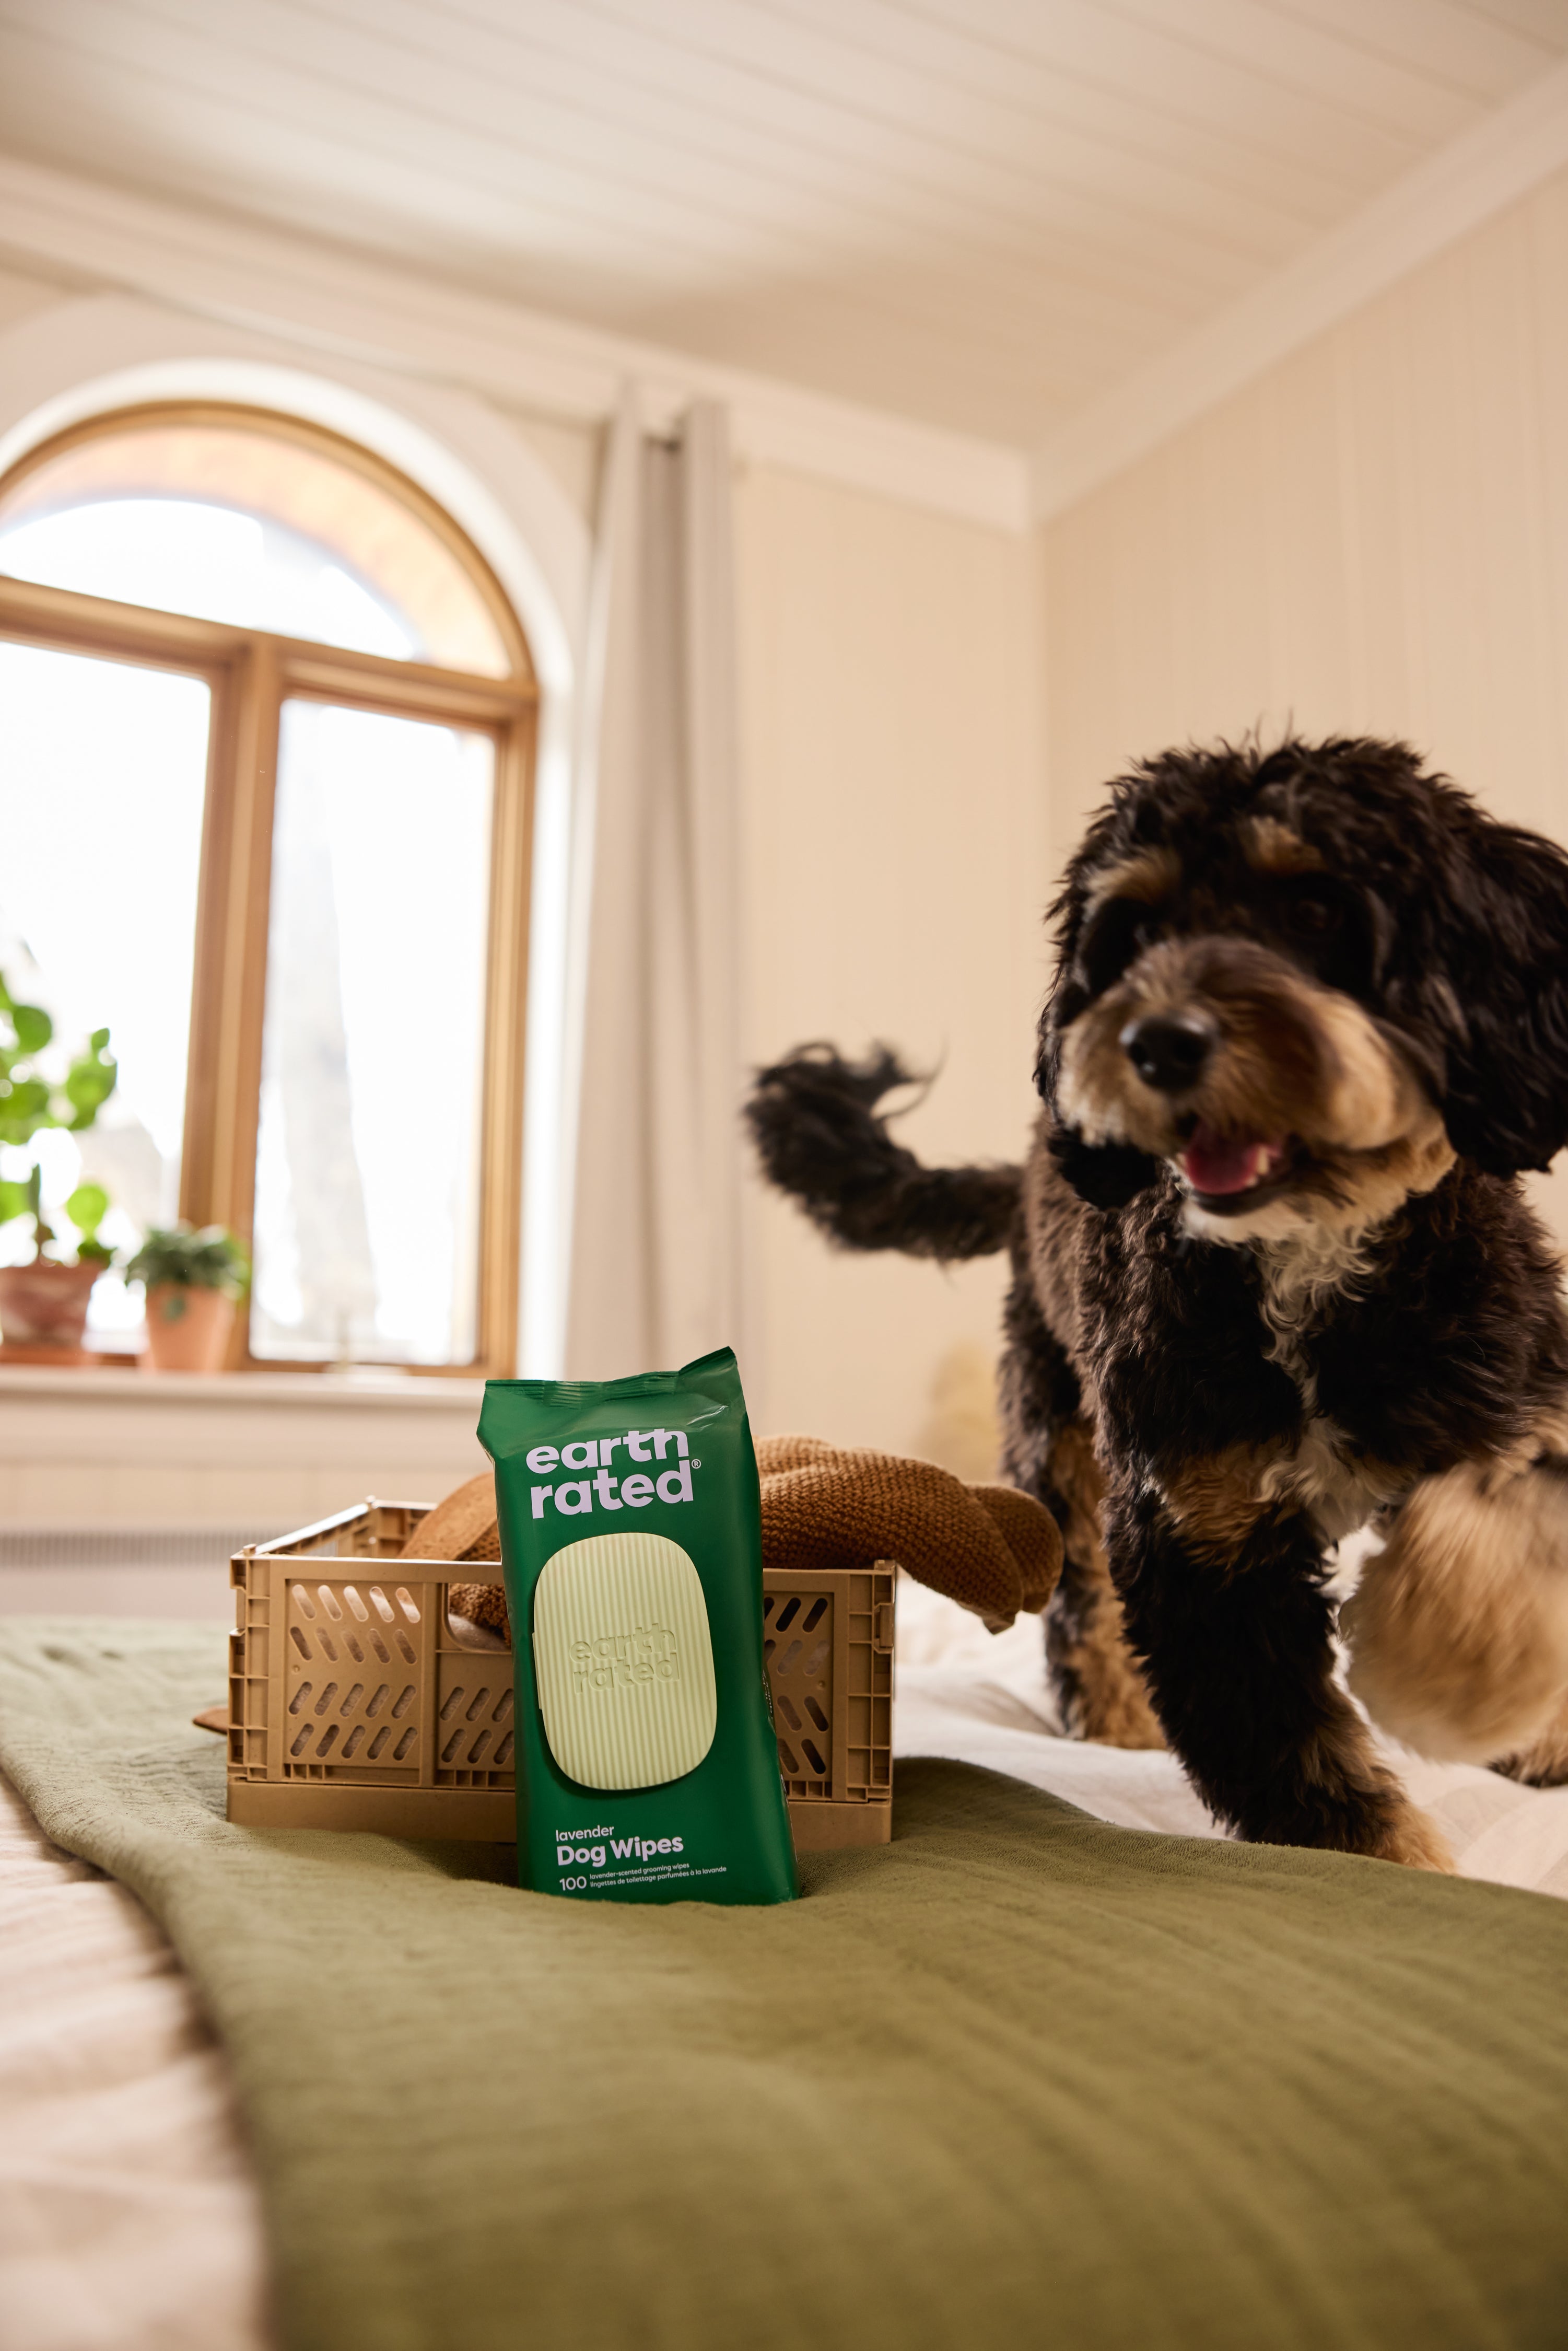 What Can You Use Dog Wipes For?